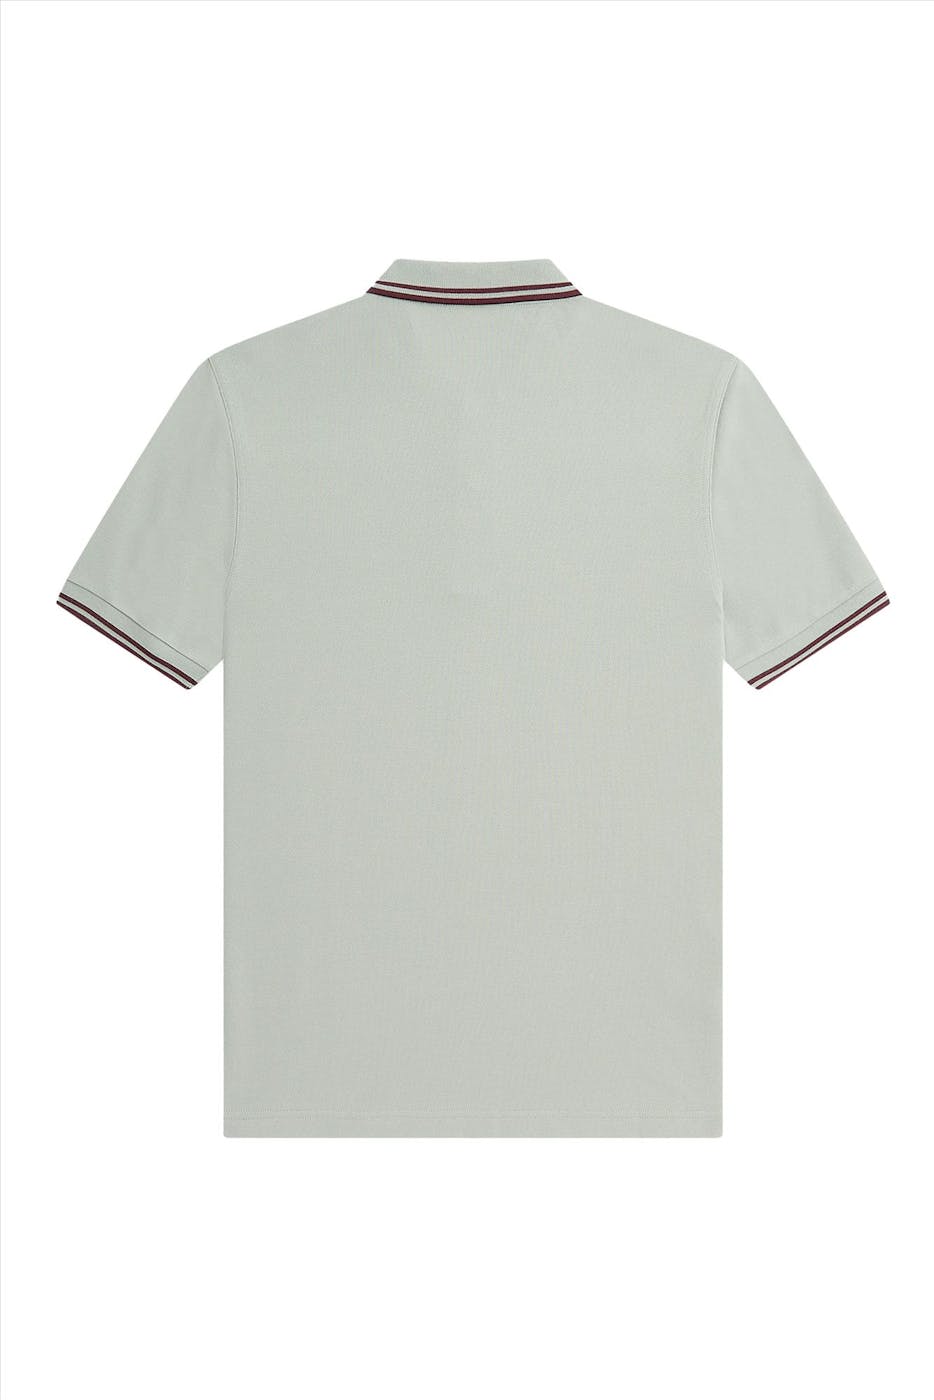 Fred Perry - Lichtgrijze Twin Tipped polo